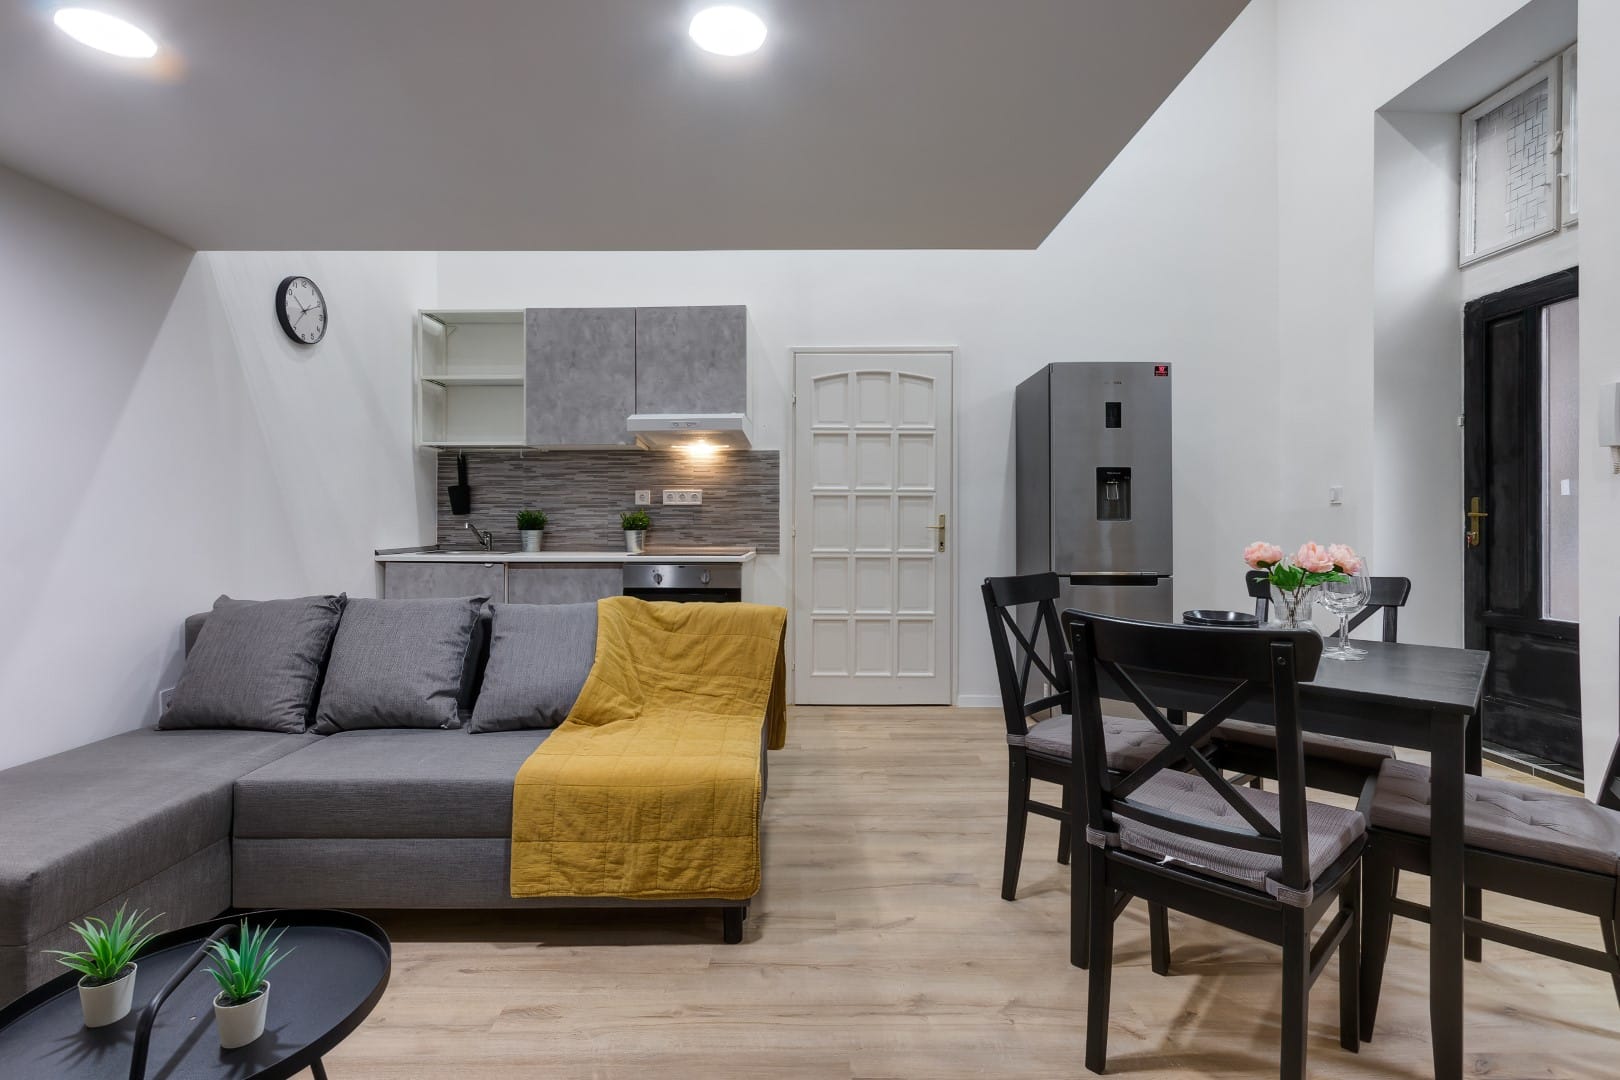 budapest-apartments-for-sale-renovated-flat-for-sale-downtown-real-estate-budapest-brand-new-studio-apartment-for-sal3